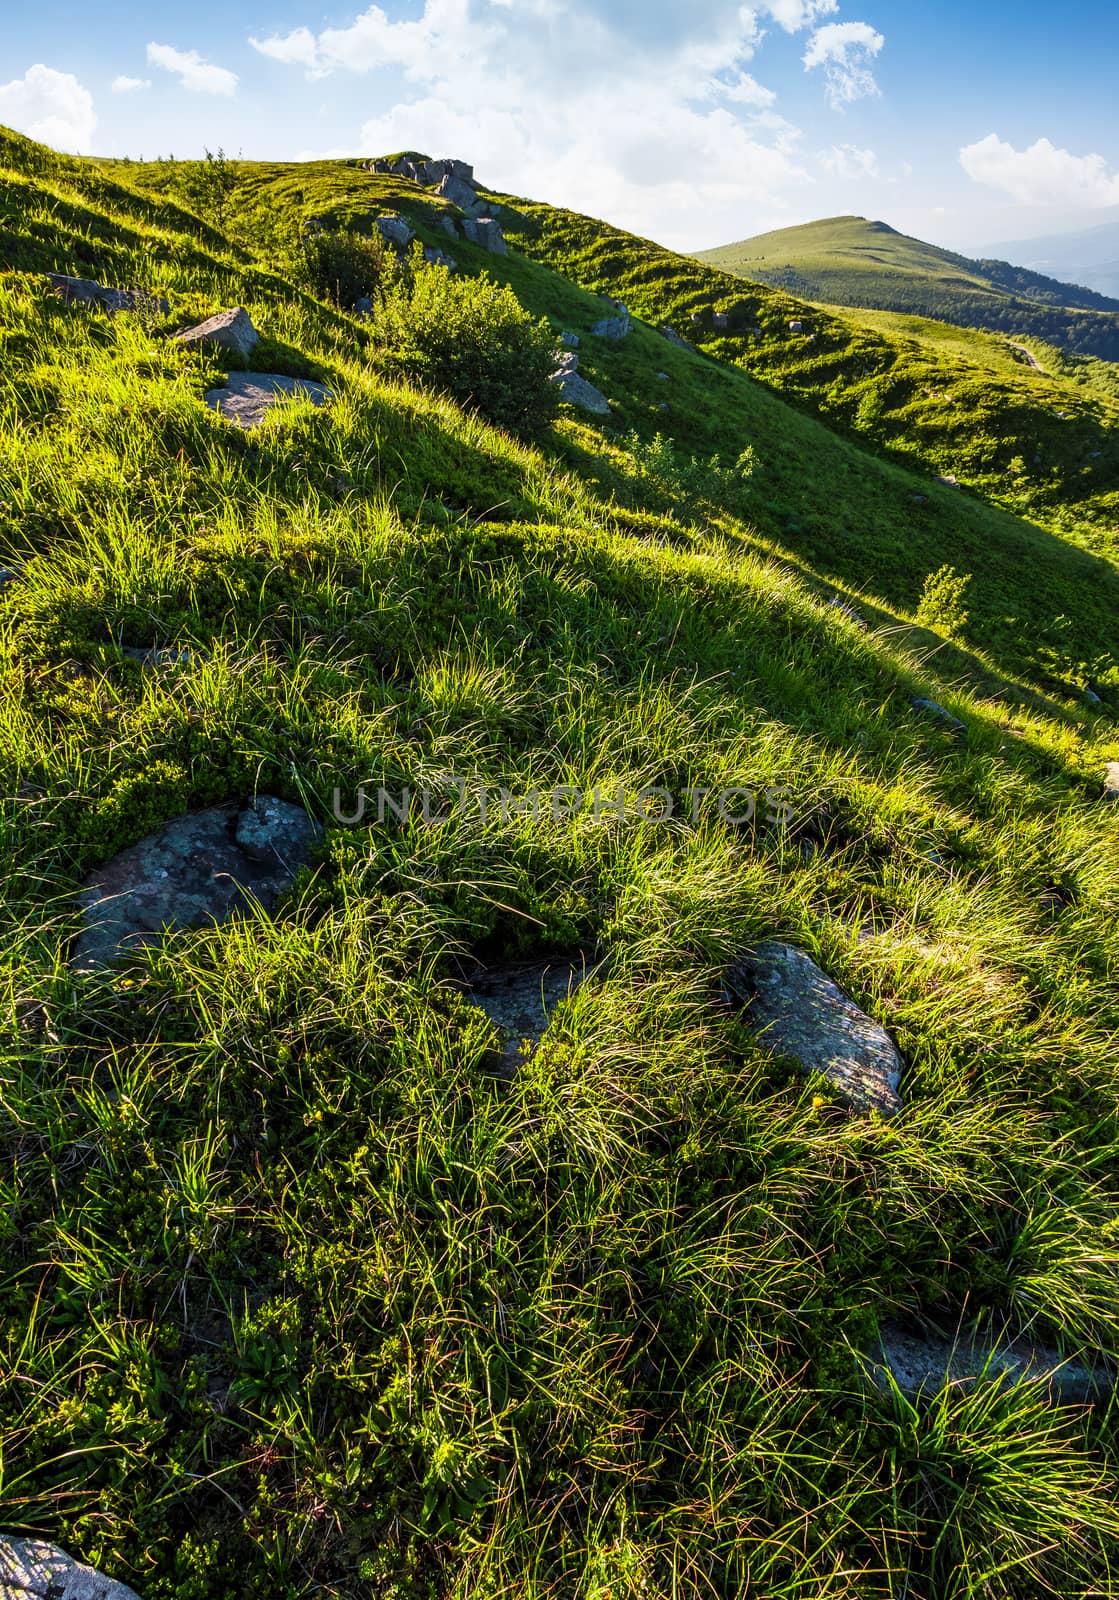 grassy slope of mountain in summertime by Pellinni